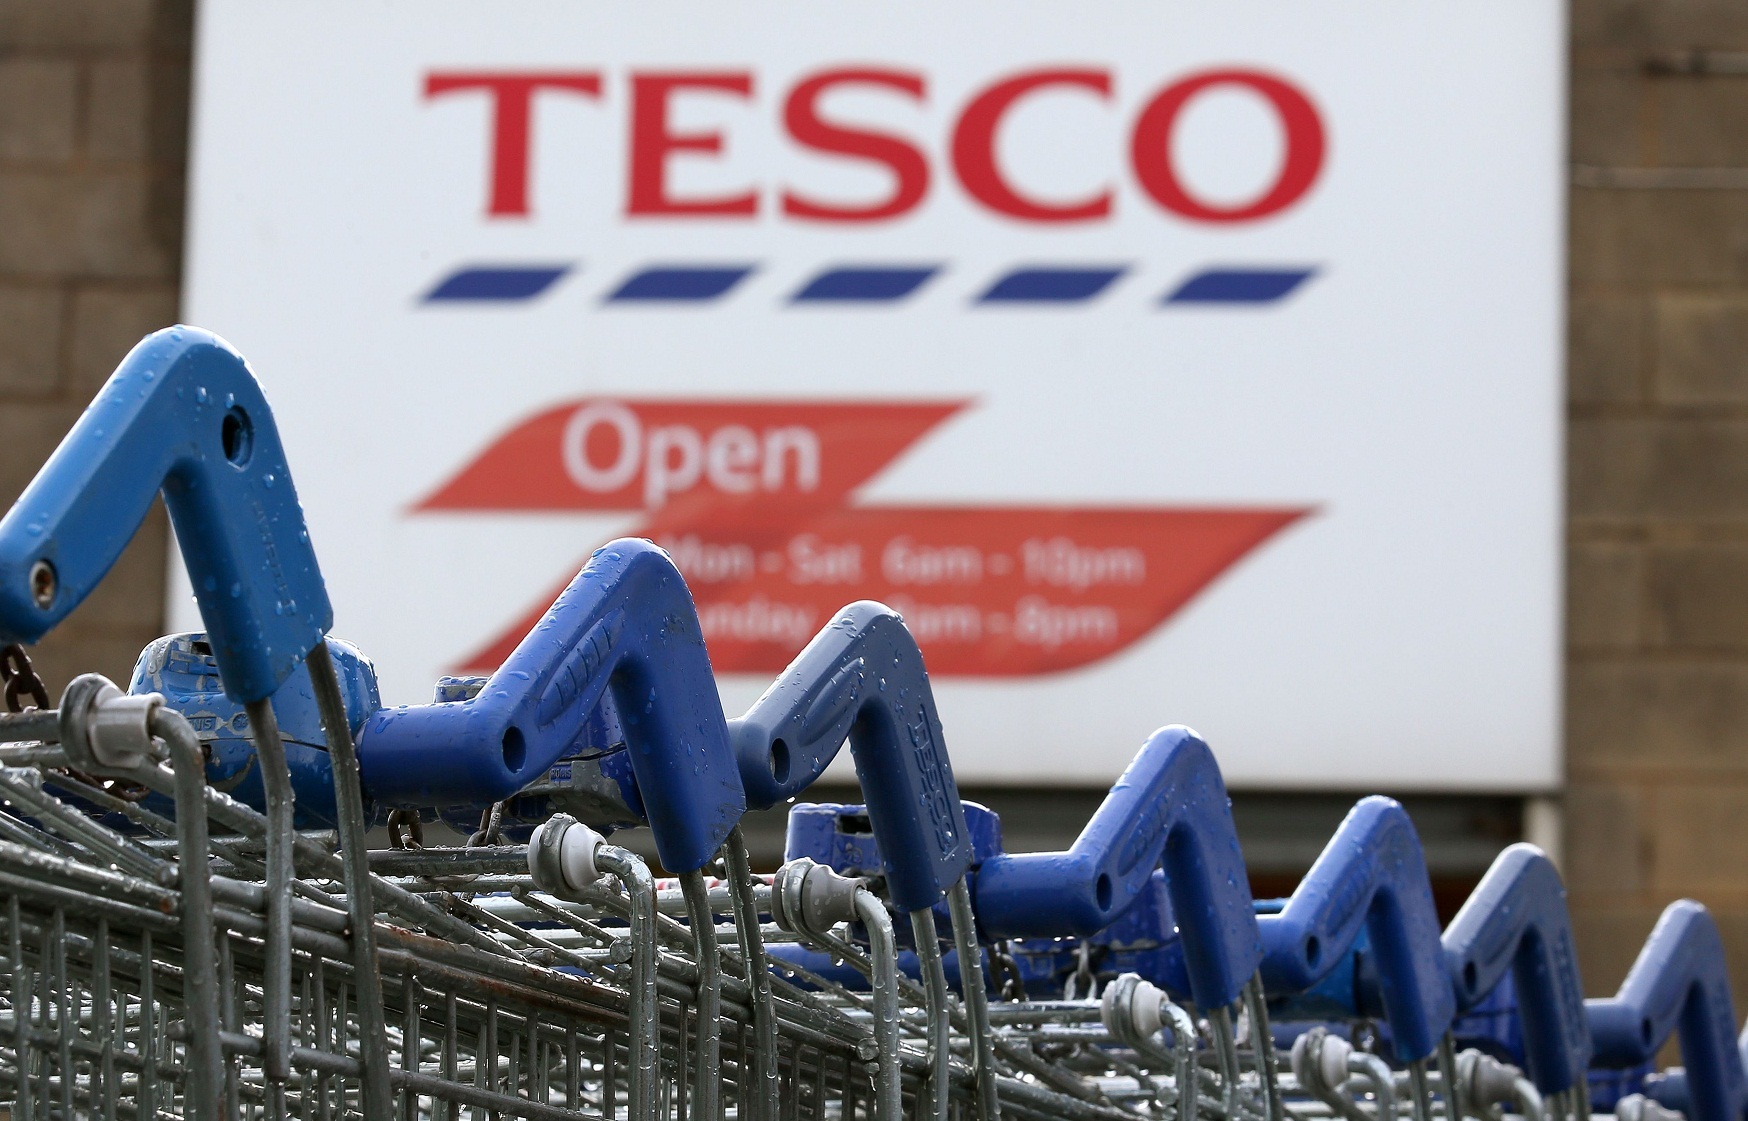 File photo dated 28/01/15 of a Tesco Superstore, as Tesco has reversed its decision to suspend more than £2 million in severance payments to two former bosses as it seeks to avoid a costly legal battle over an accounting scandal that hit the supermarket last autumn.